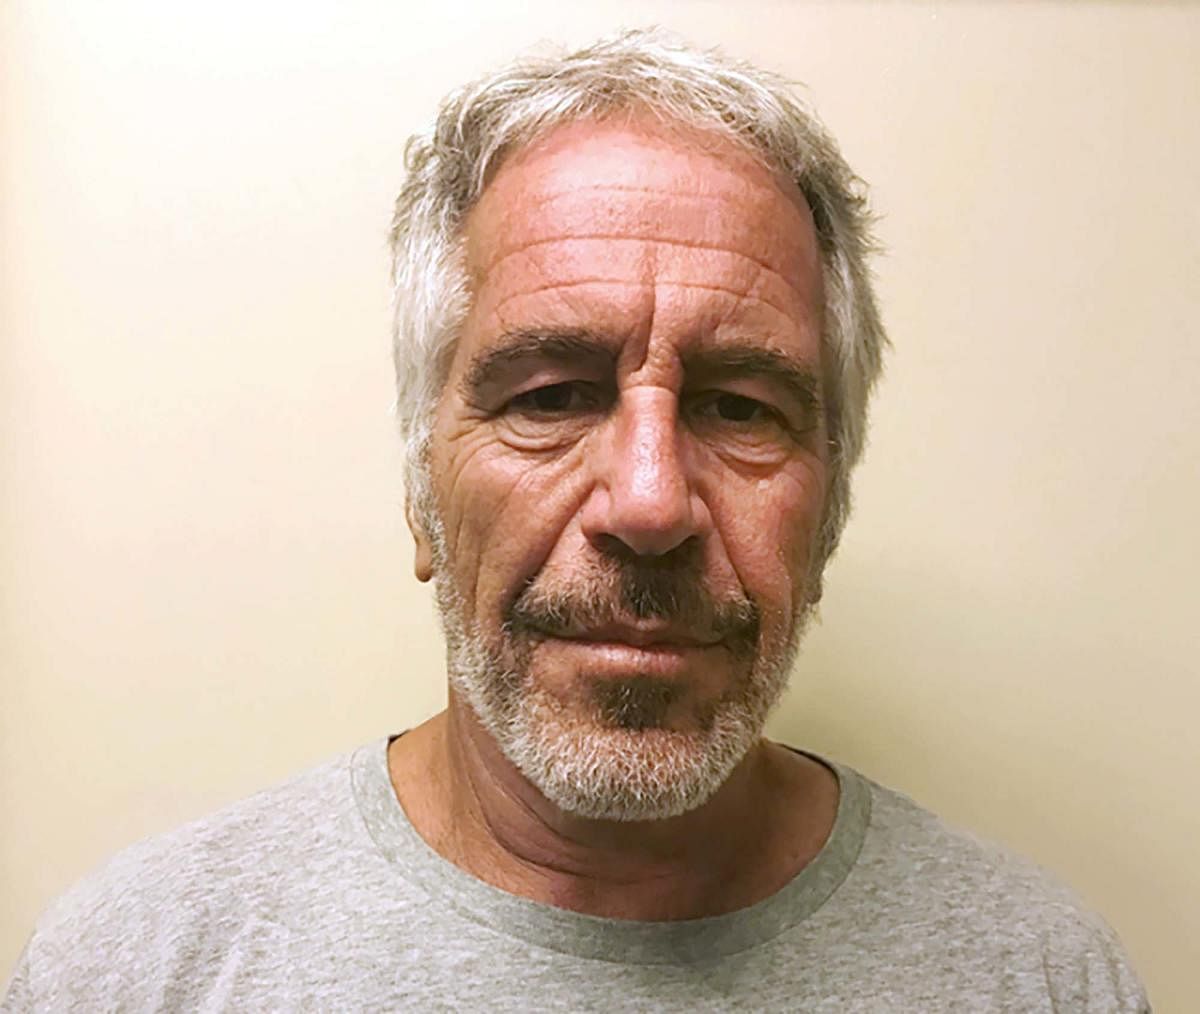 The city's medical examiner ruled Epstein's death a suicide.